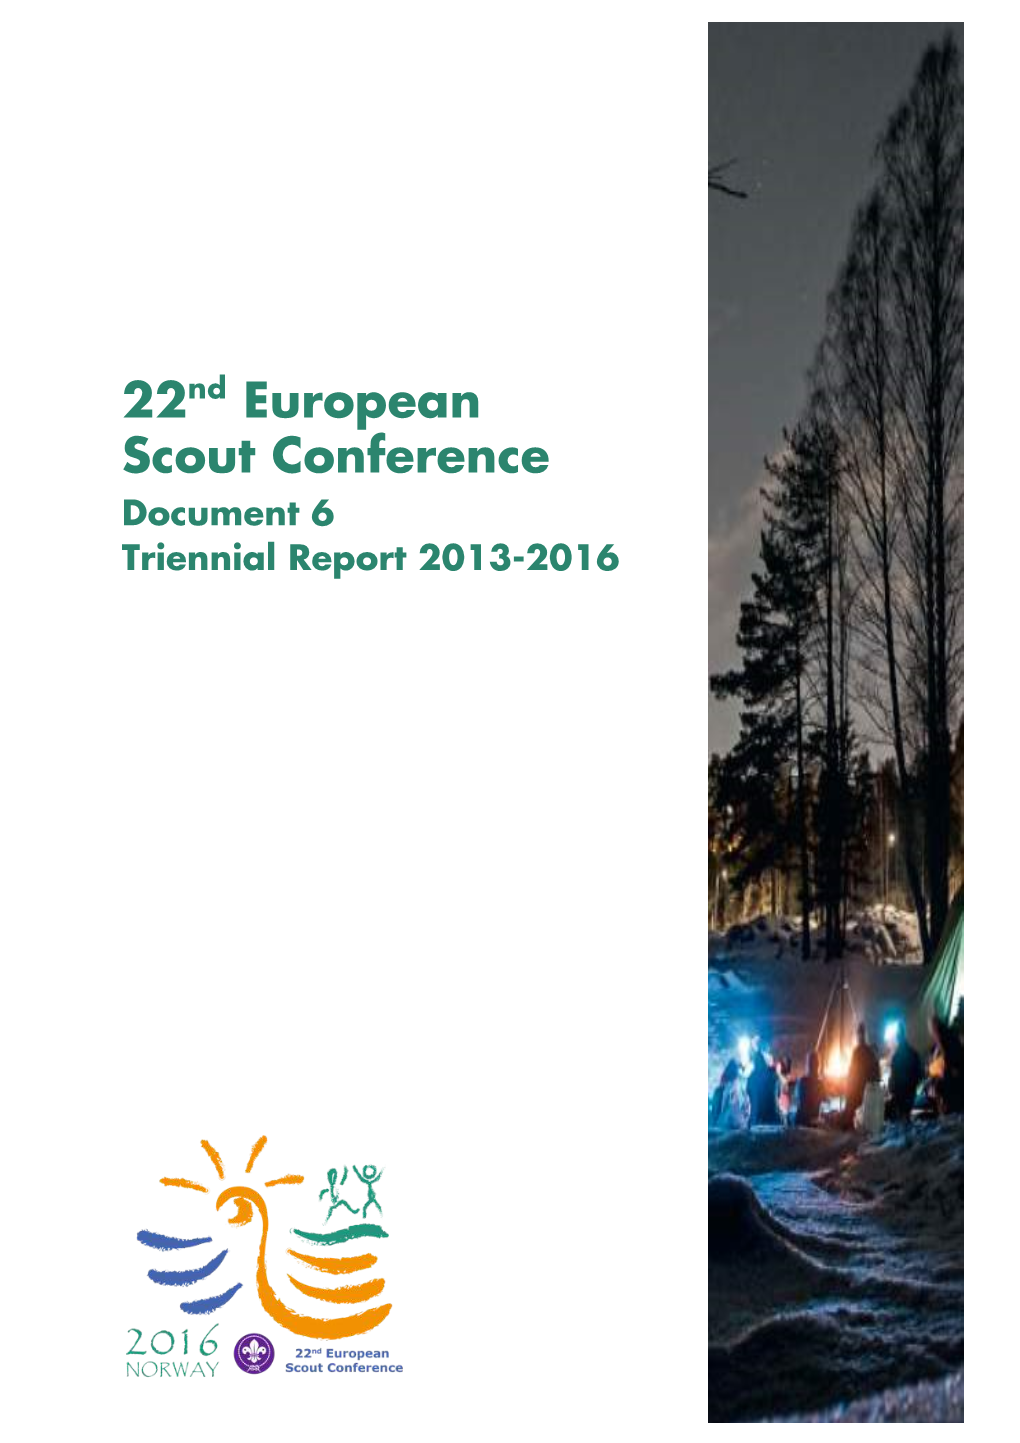 22Nd European Scout Conference Document 6 Triennial Report 2013-2016